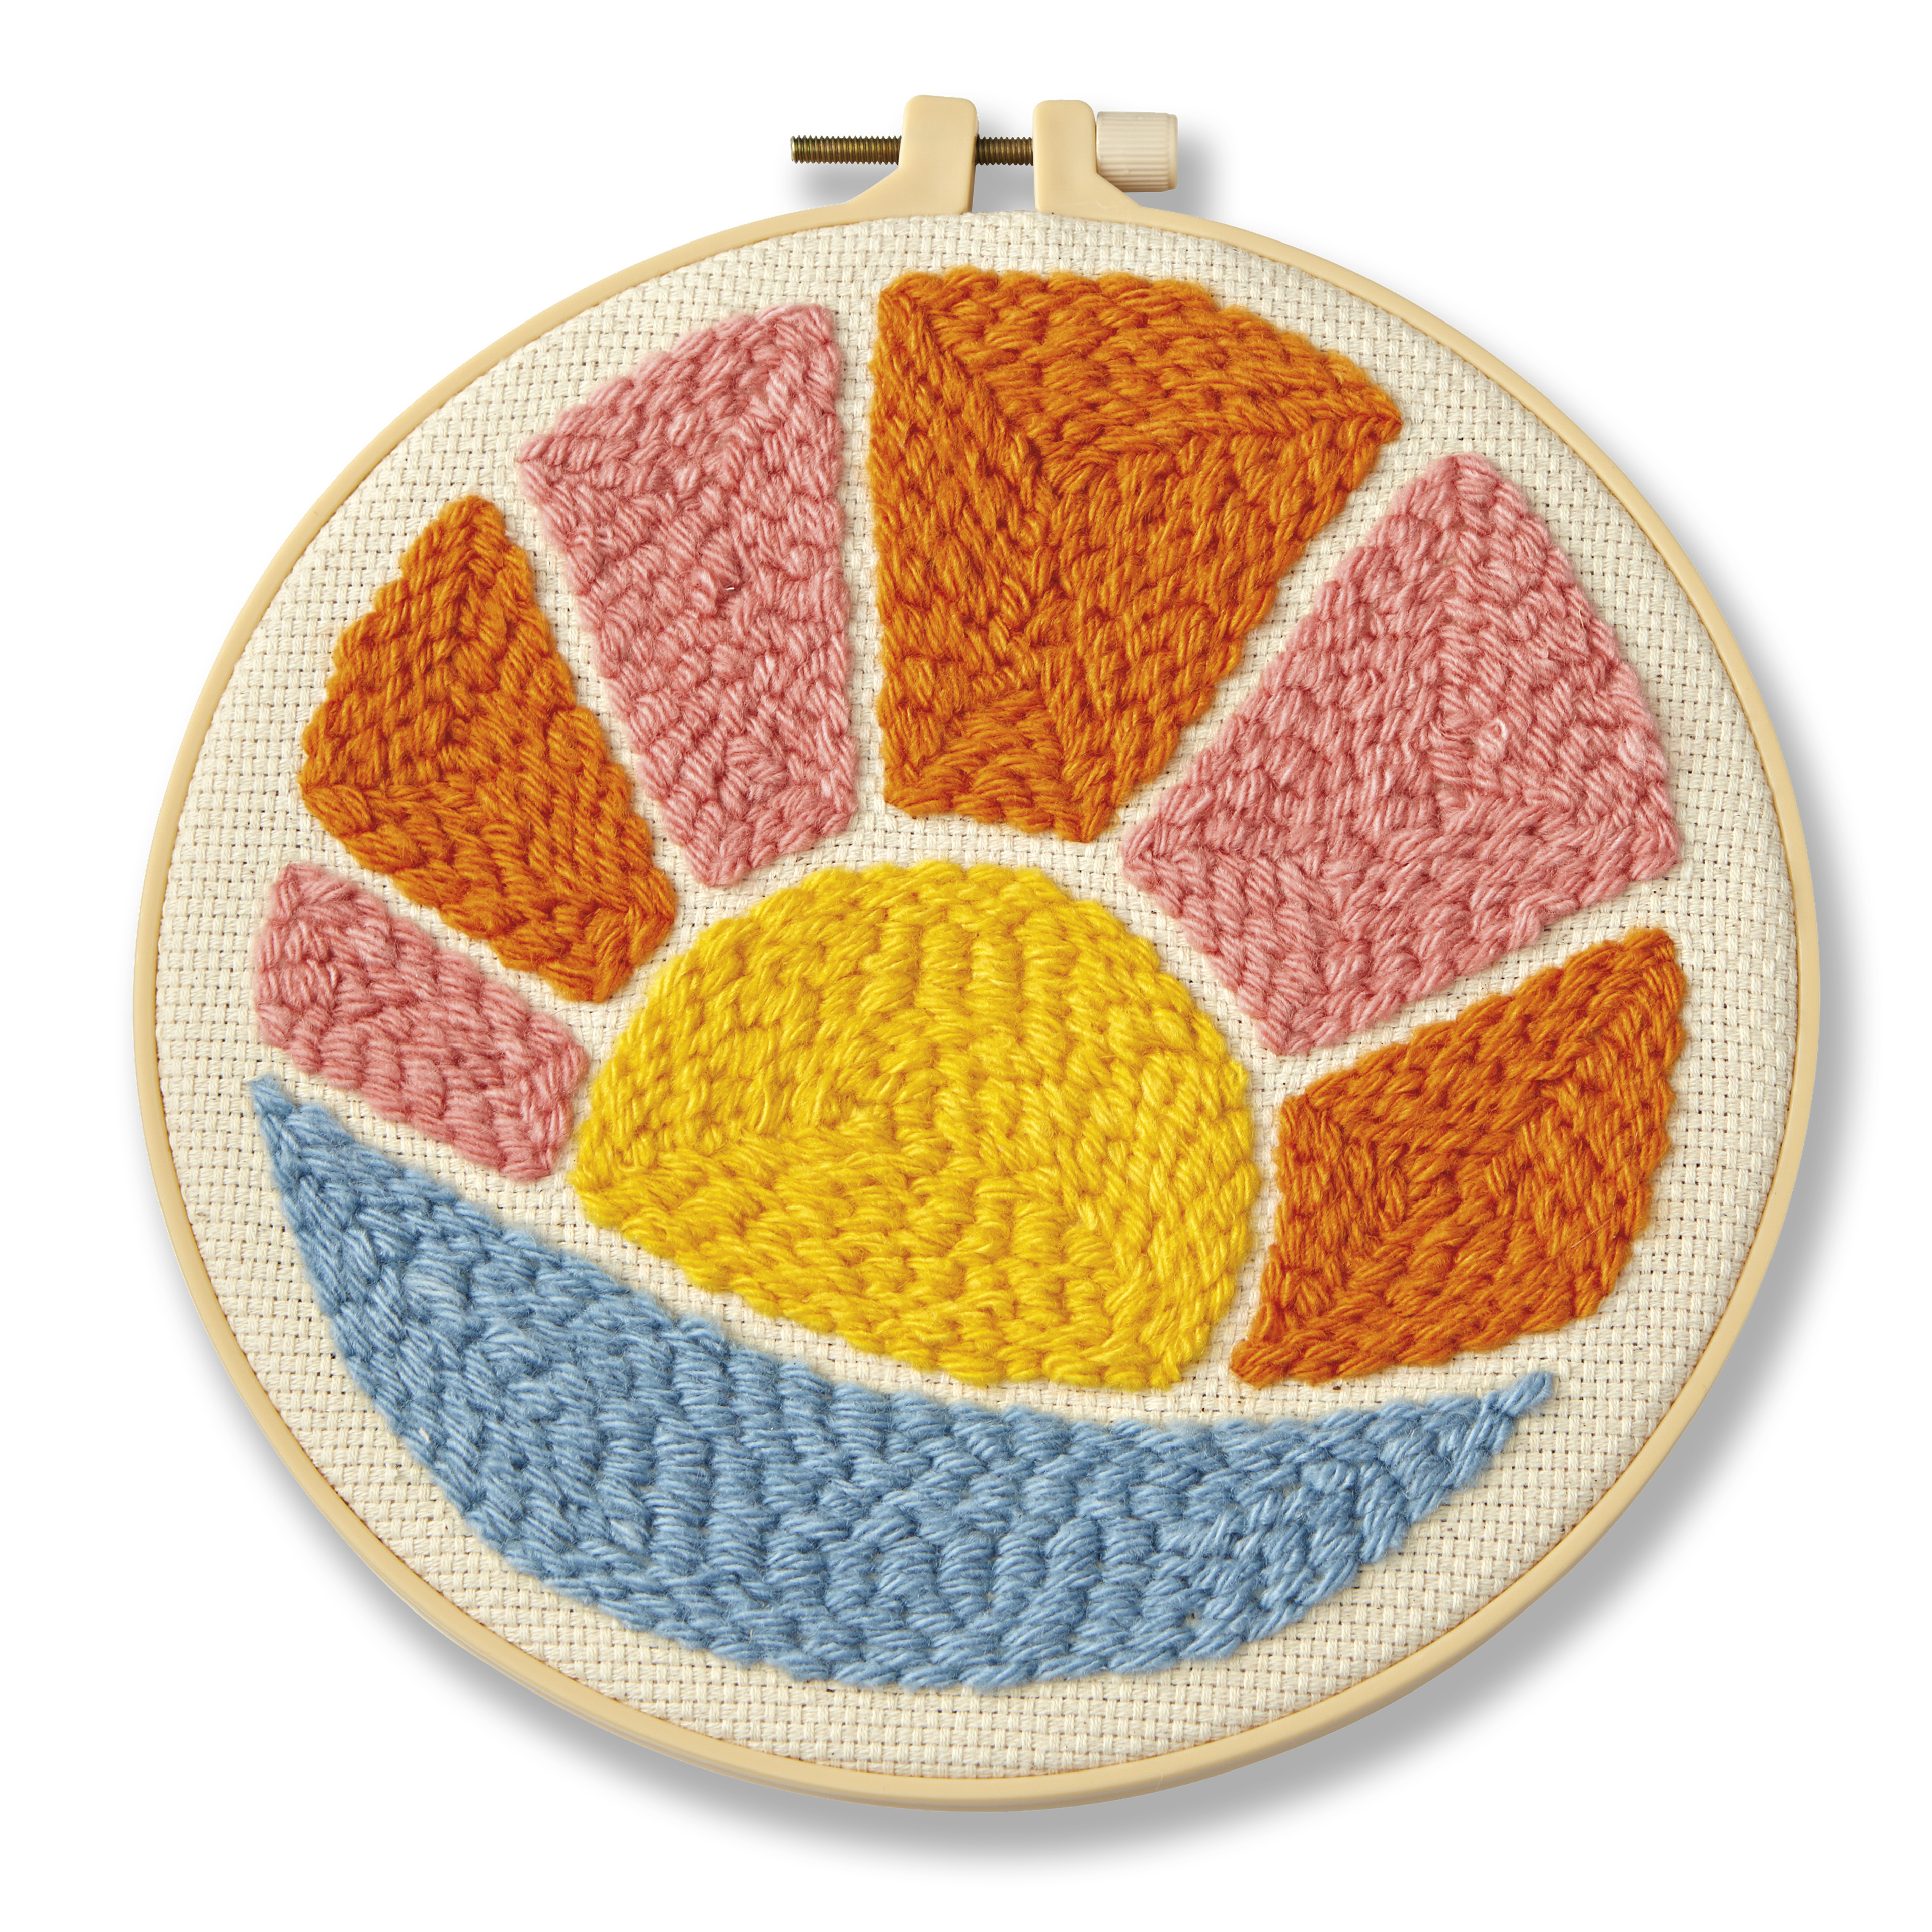 Sunrise Punch Needle Kit by Loops & Threads®